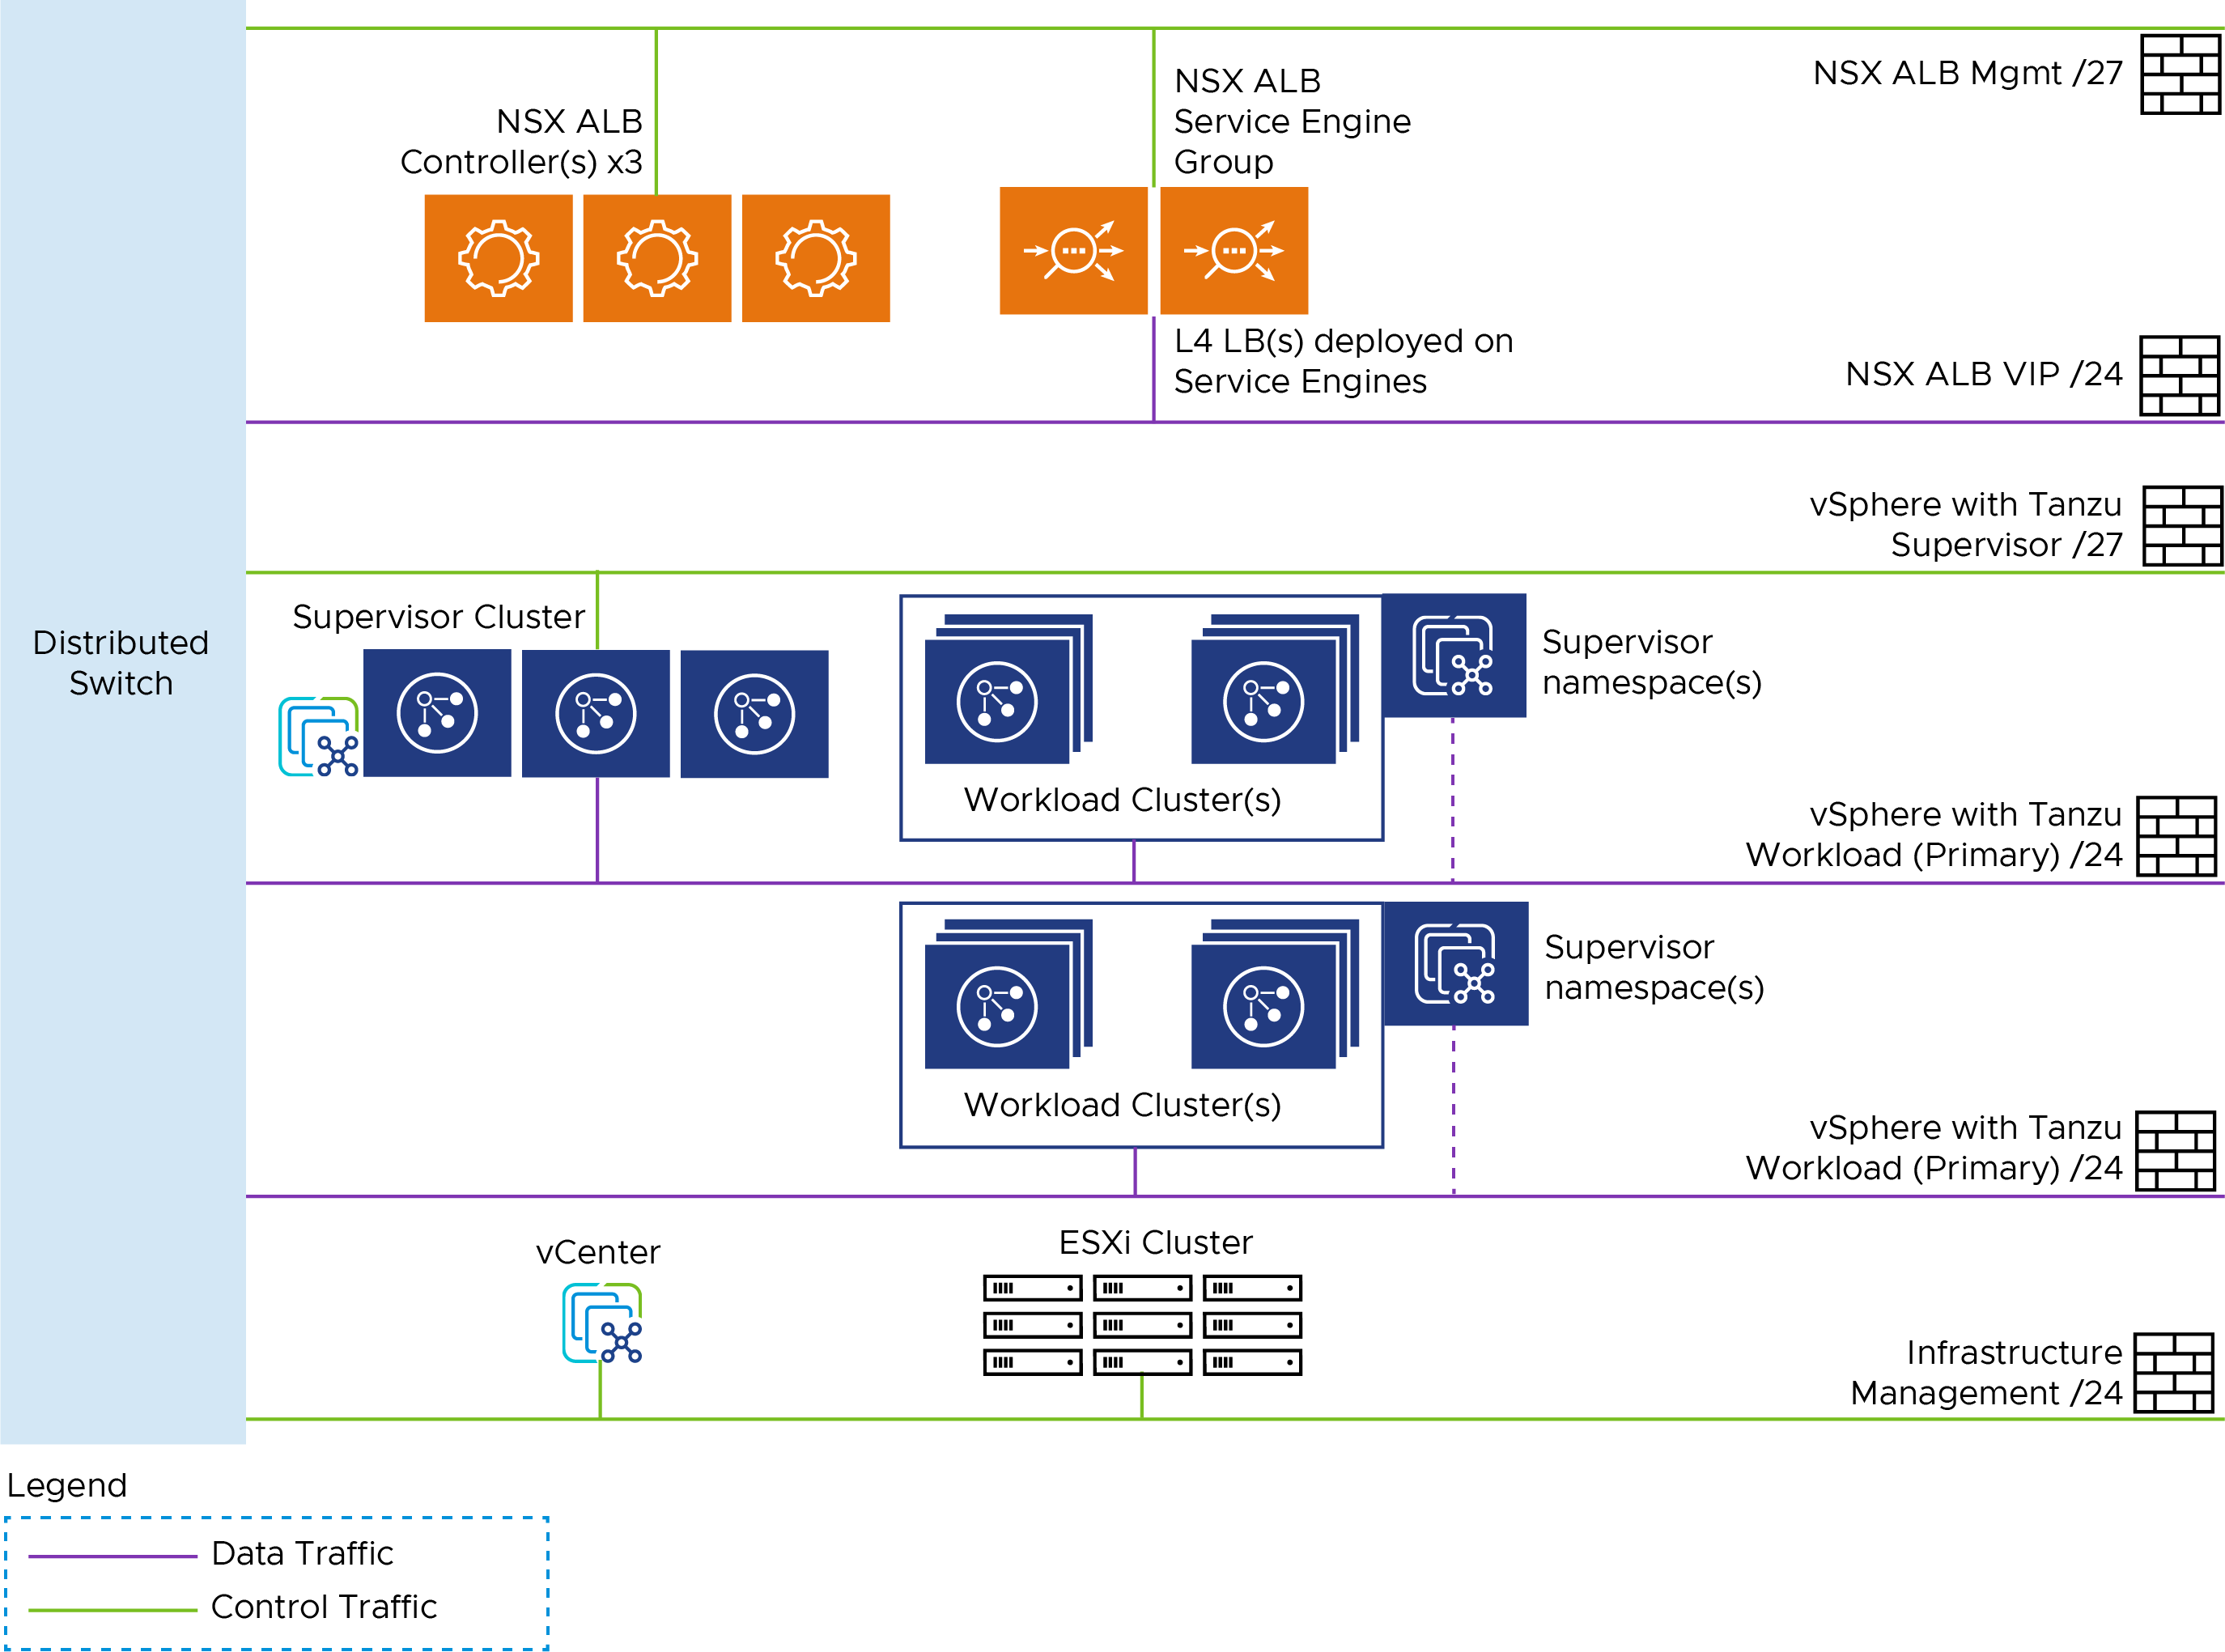 Network design for TKO deployment on vSphere with Tanzu and VDS